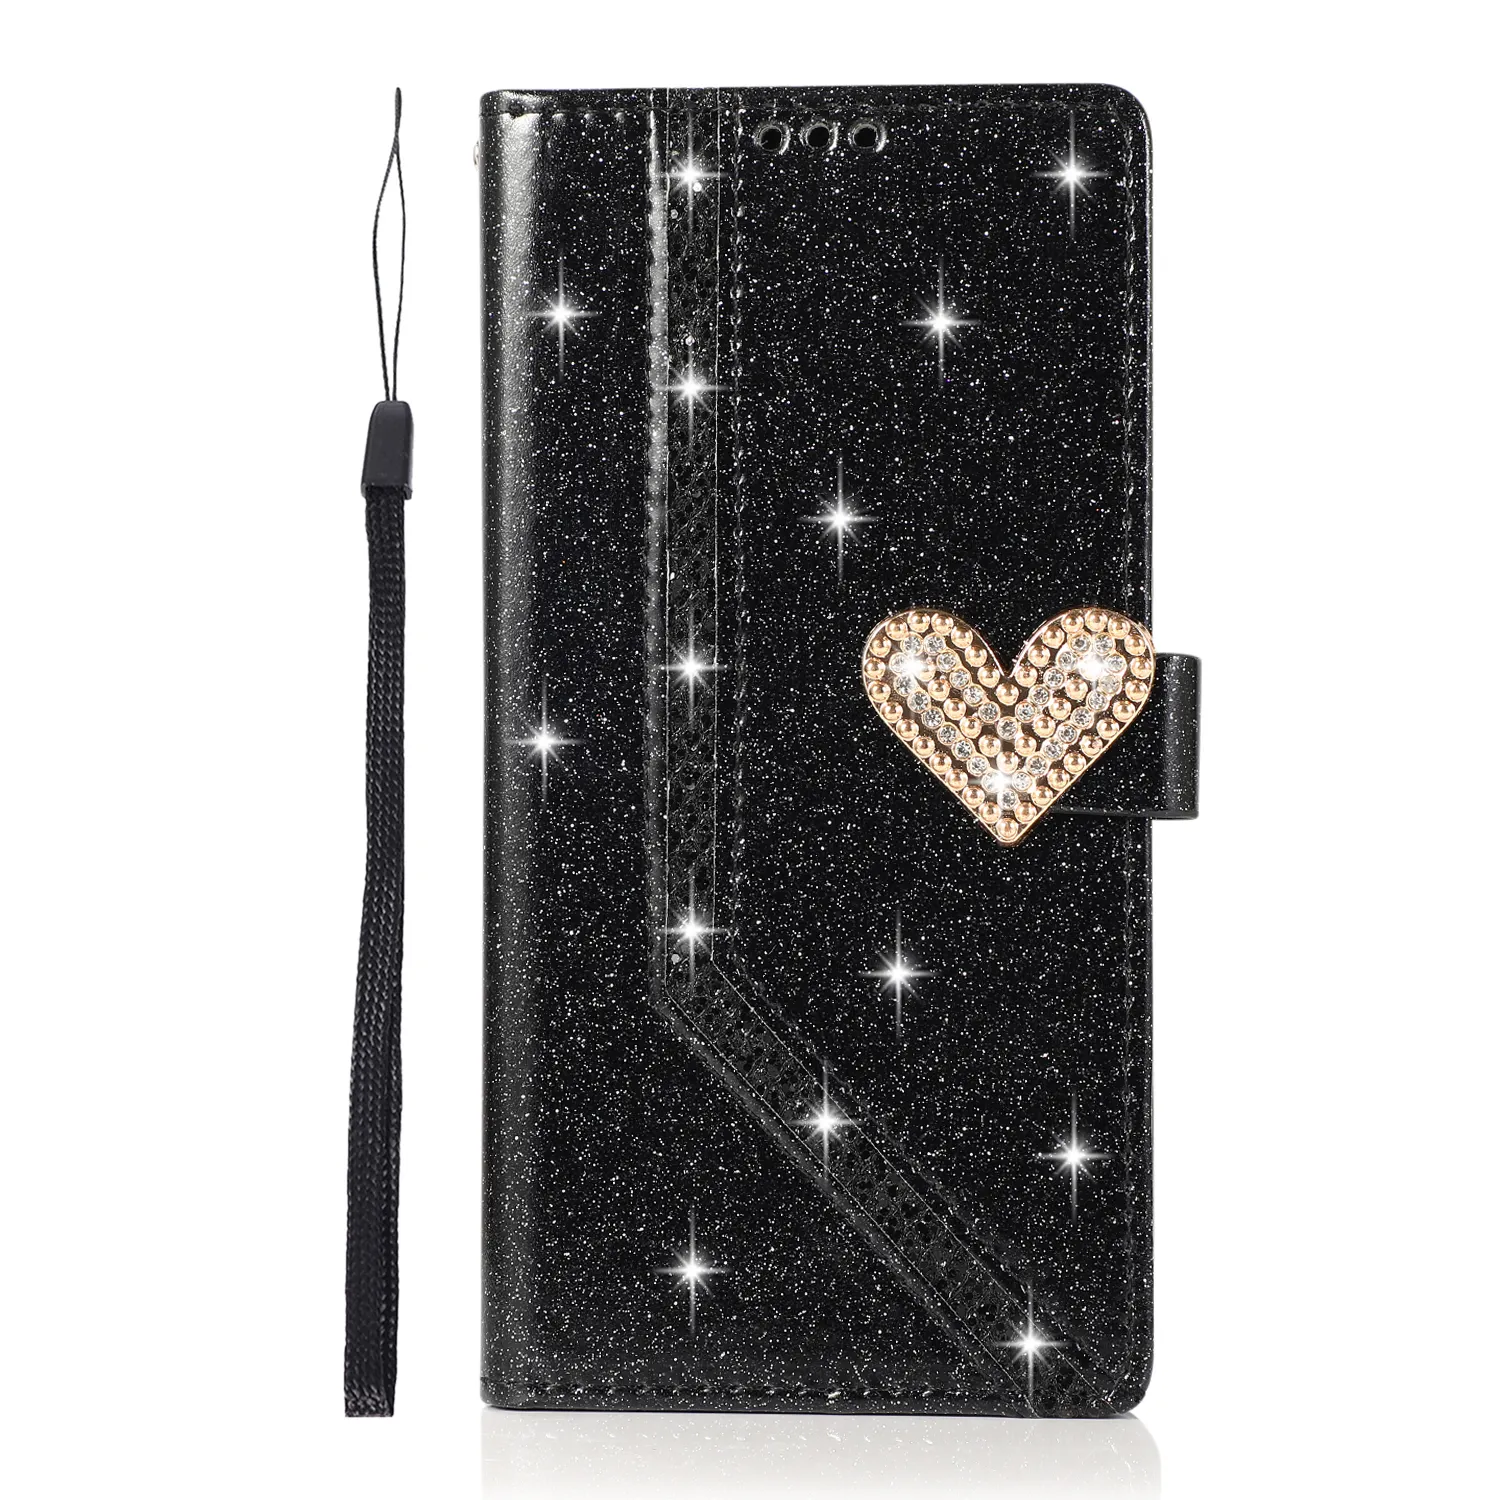 Luxury Leather Shining lovely Flip 2 in 1 wallet Phone cover for iPhone Samsung S22ULTRA s21 note 20U Huawei